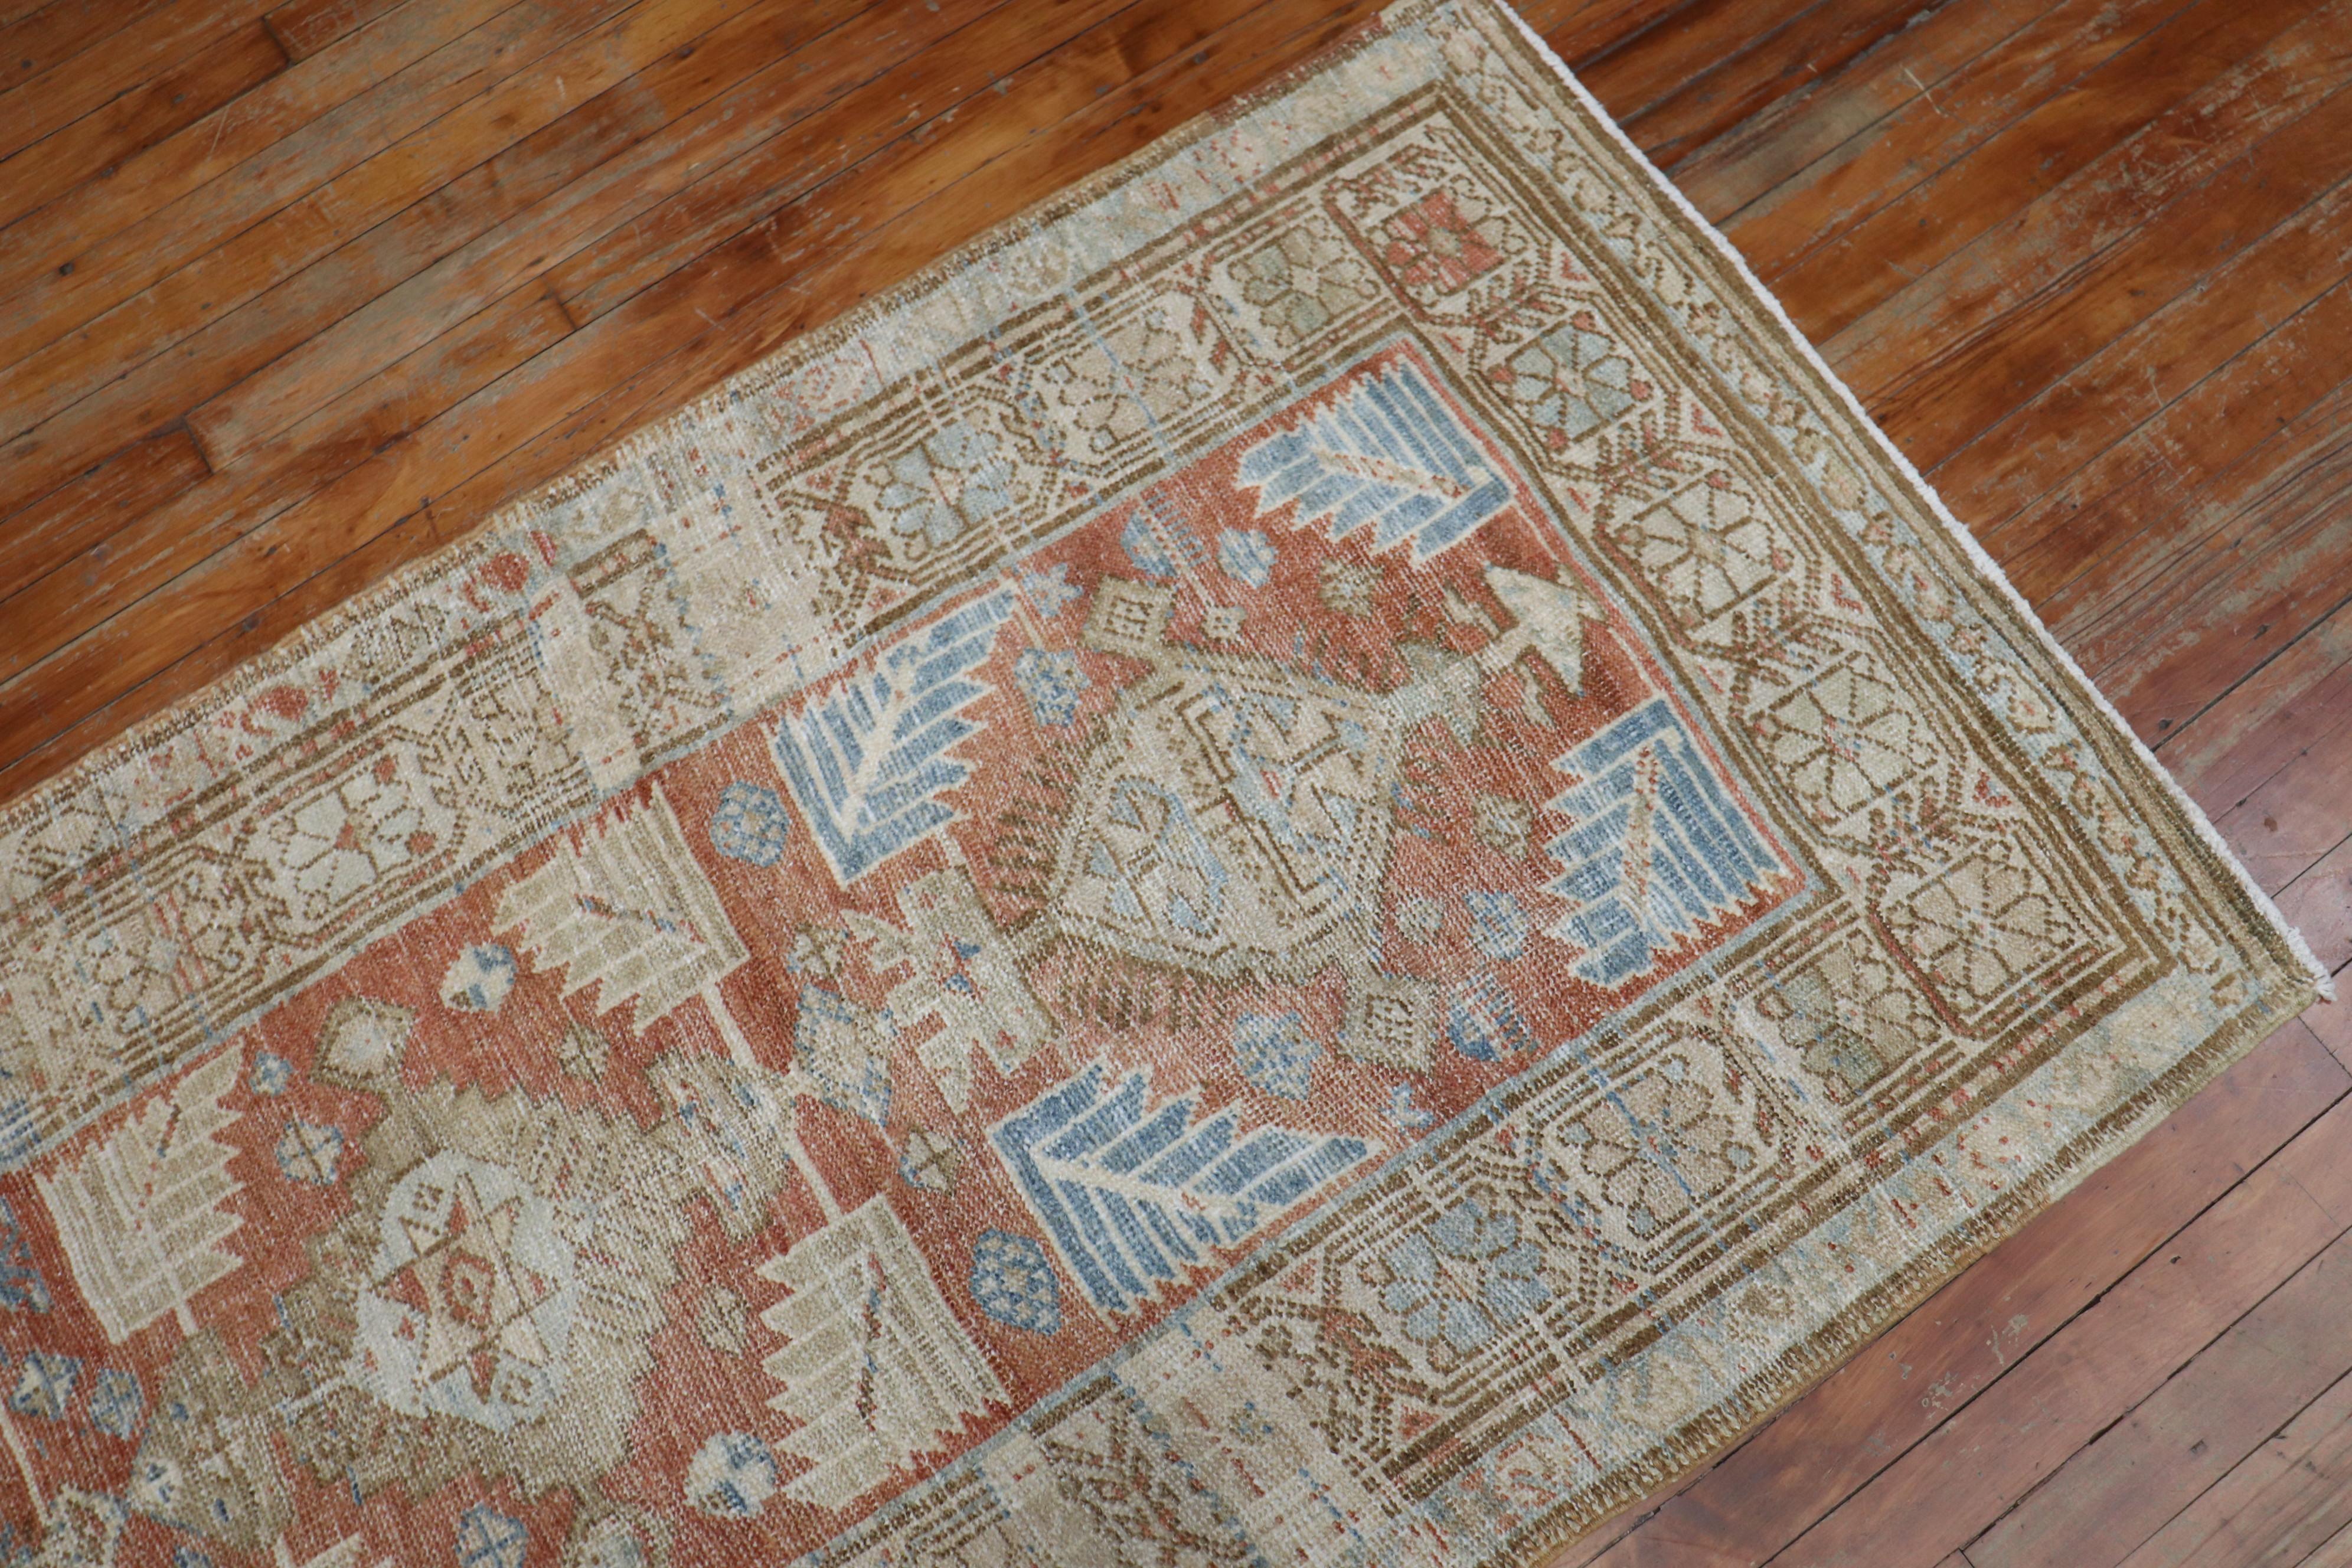 An early 20th century tribal northwest Persian runner

Measures: 3' x 14'3''.